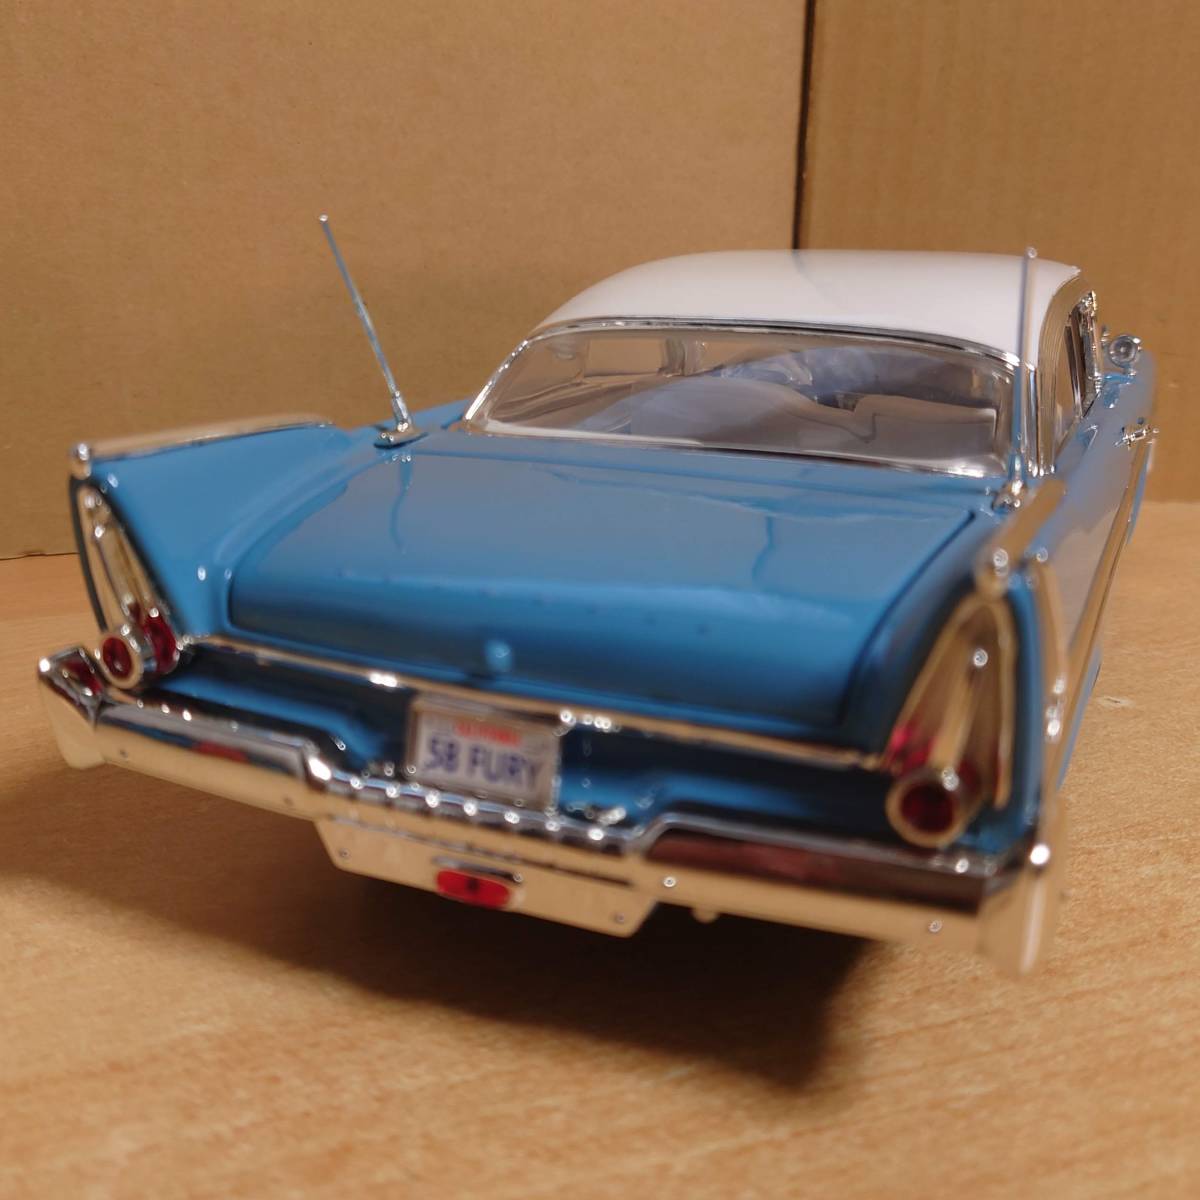 1/18 plymouth Fury 1958 light blue Plymouth Fury MOTORMAX made die-cast 